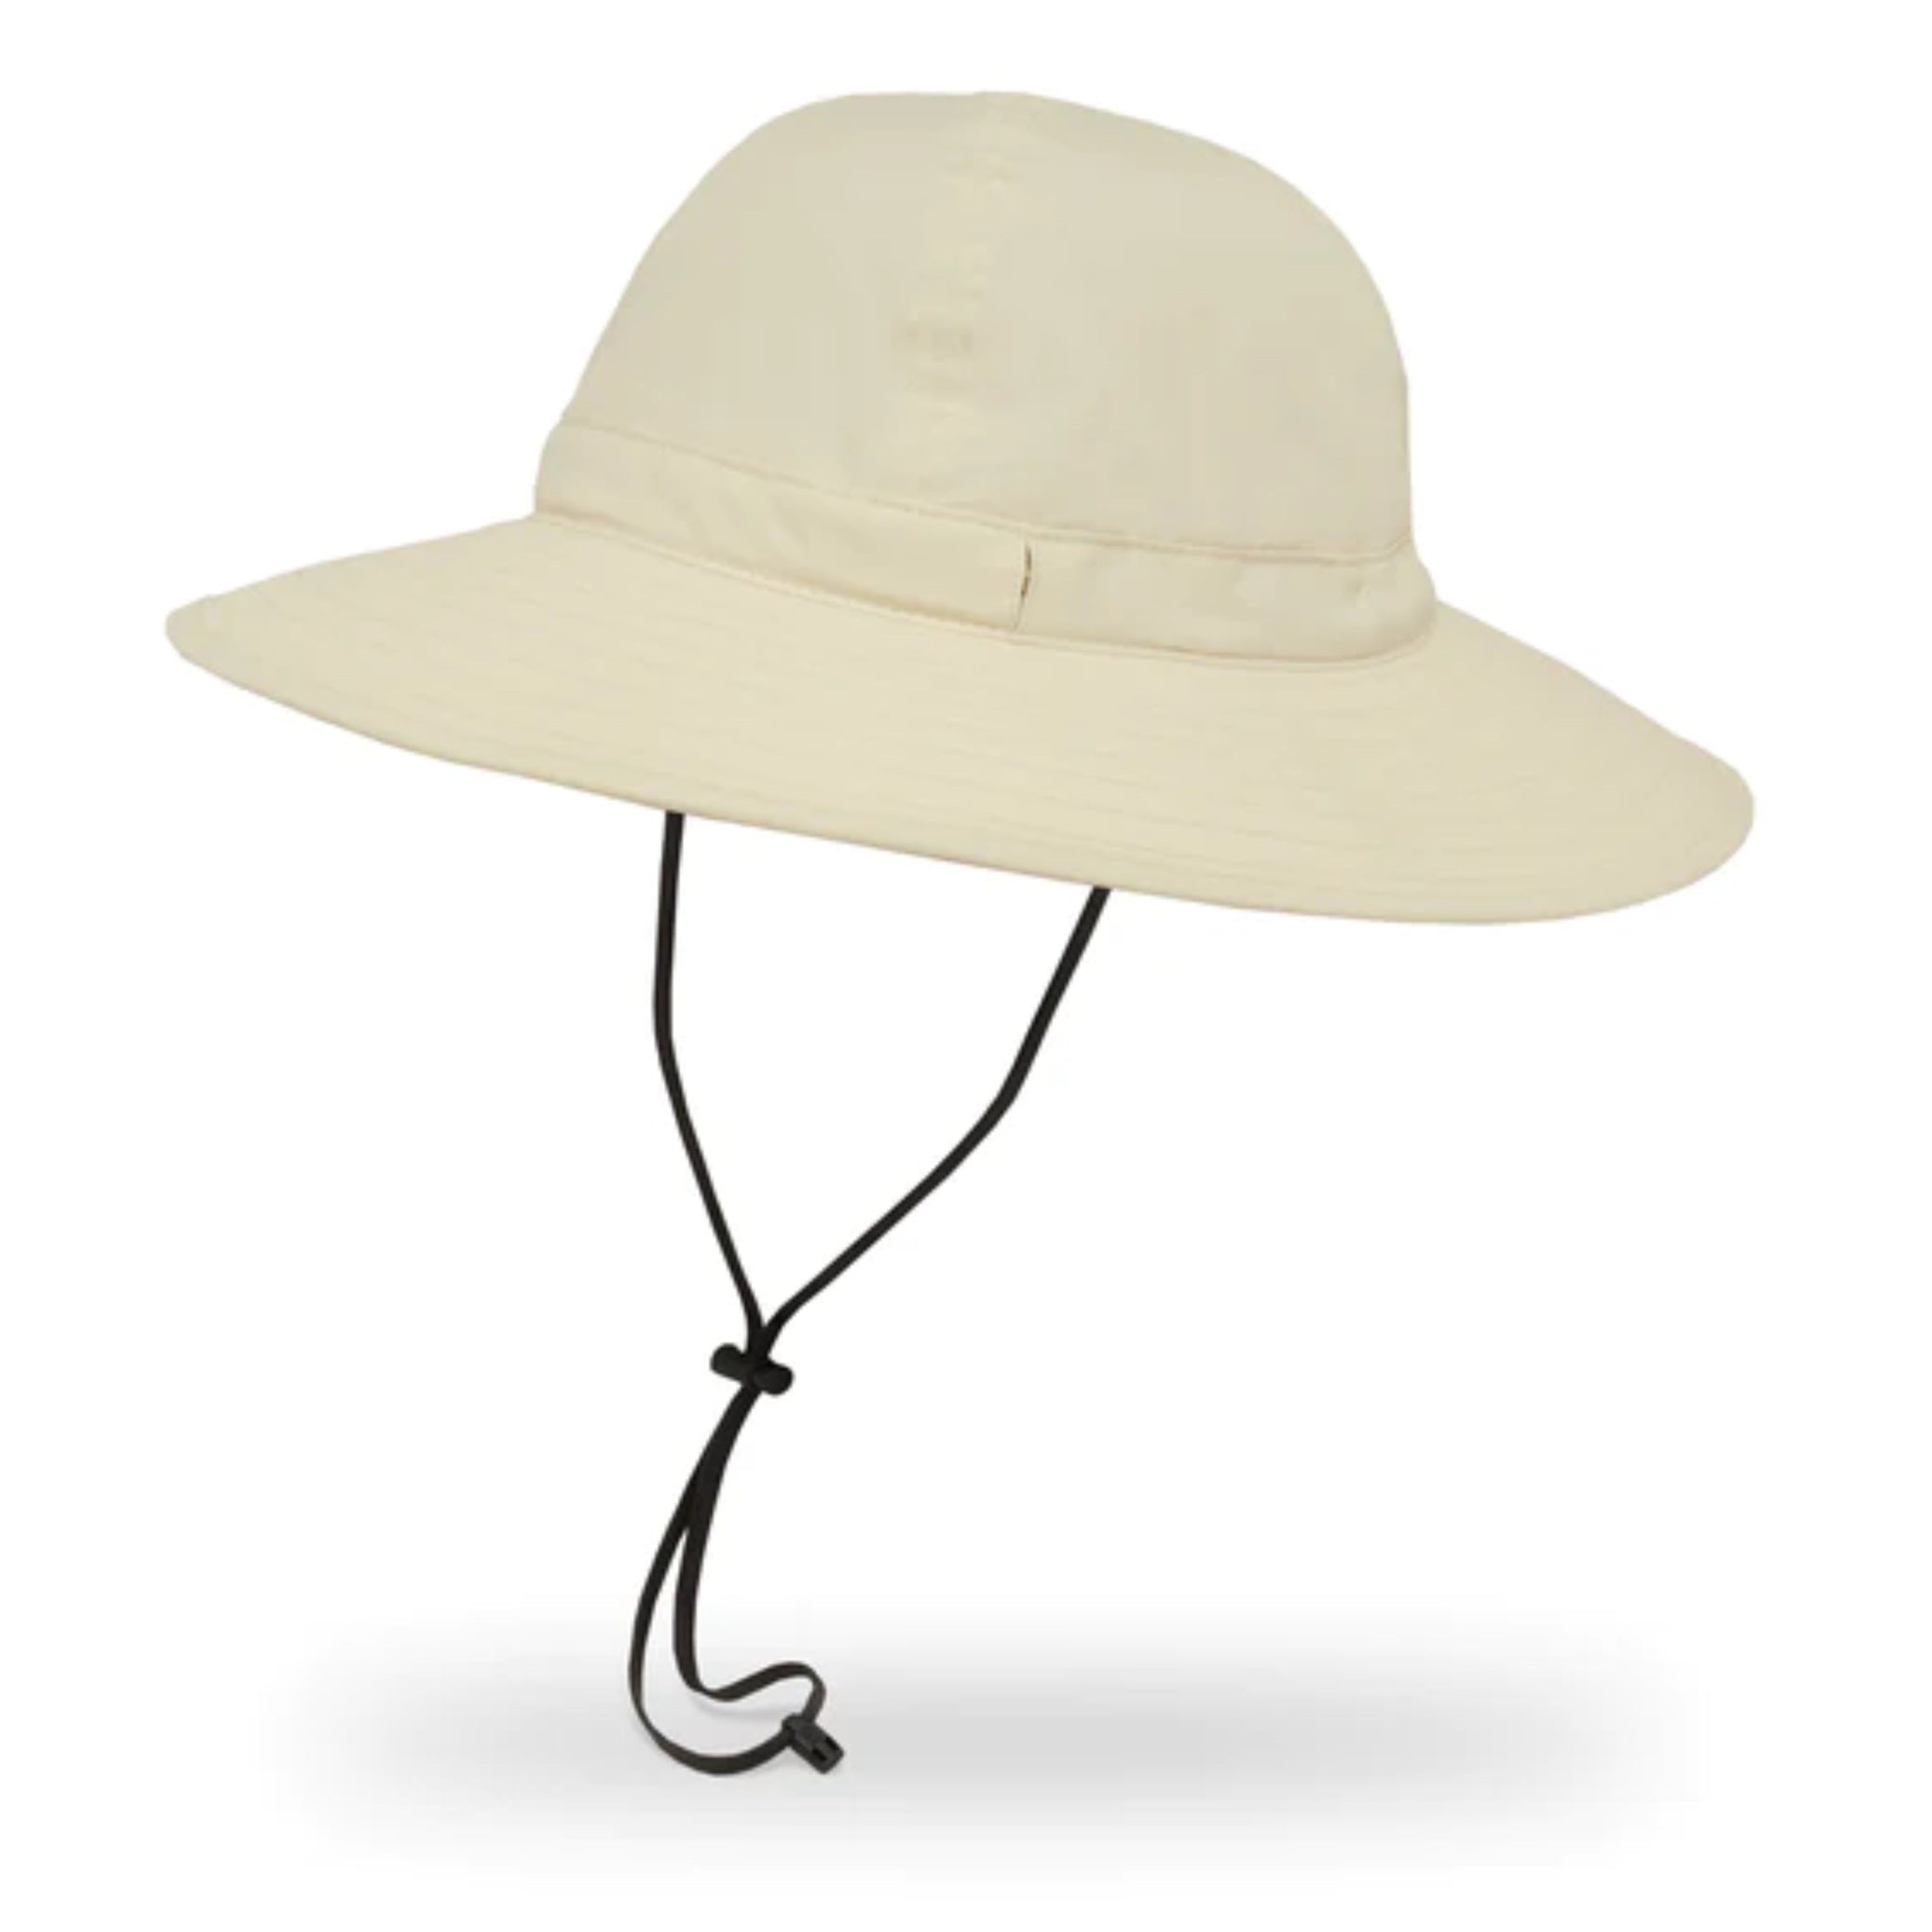 The Hat Shop Sunday Afternoons 'Voyage' Sun Hat UPF50+ Opal